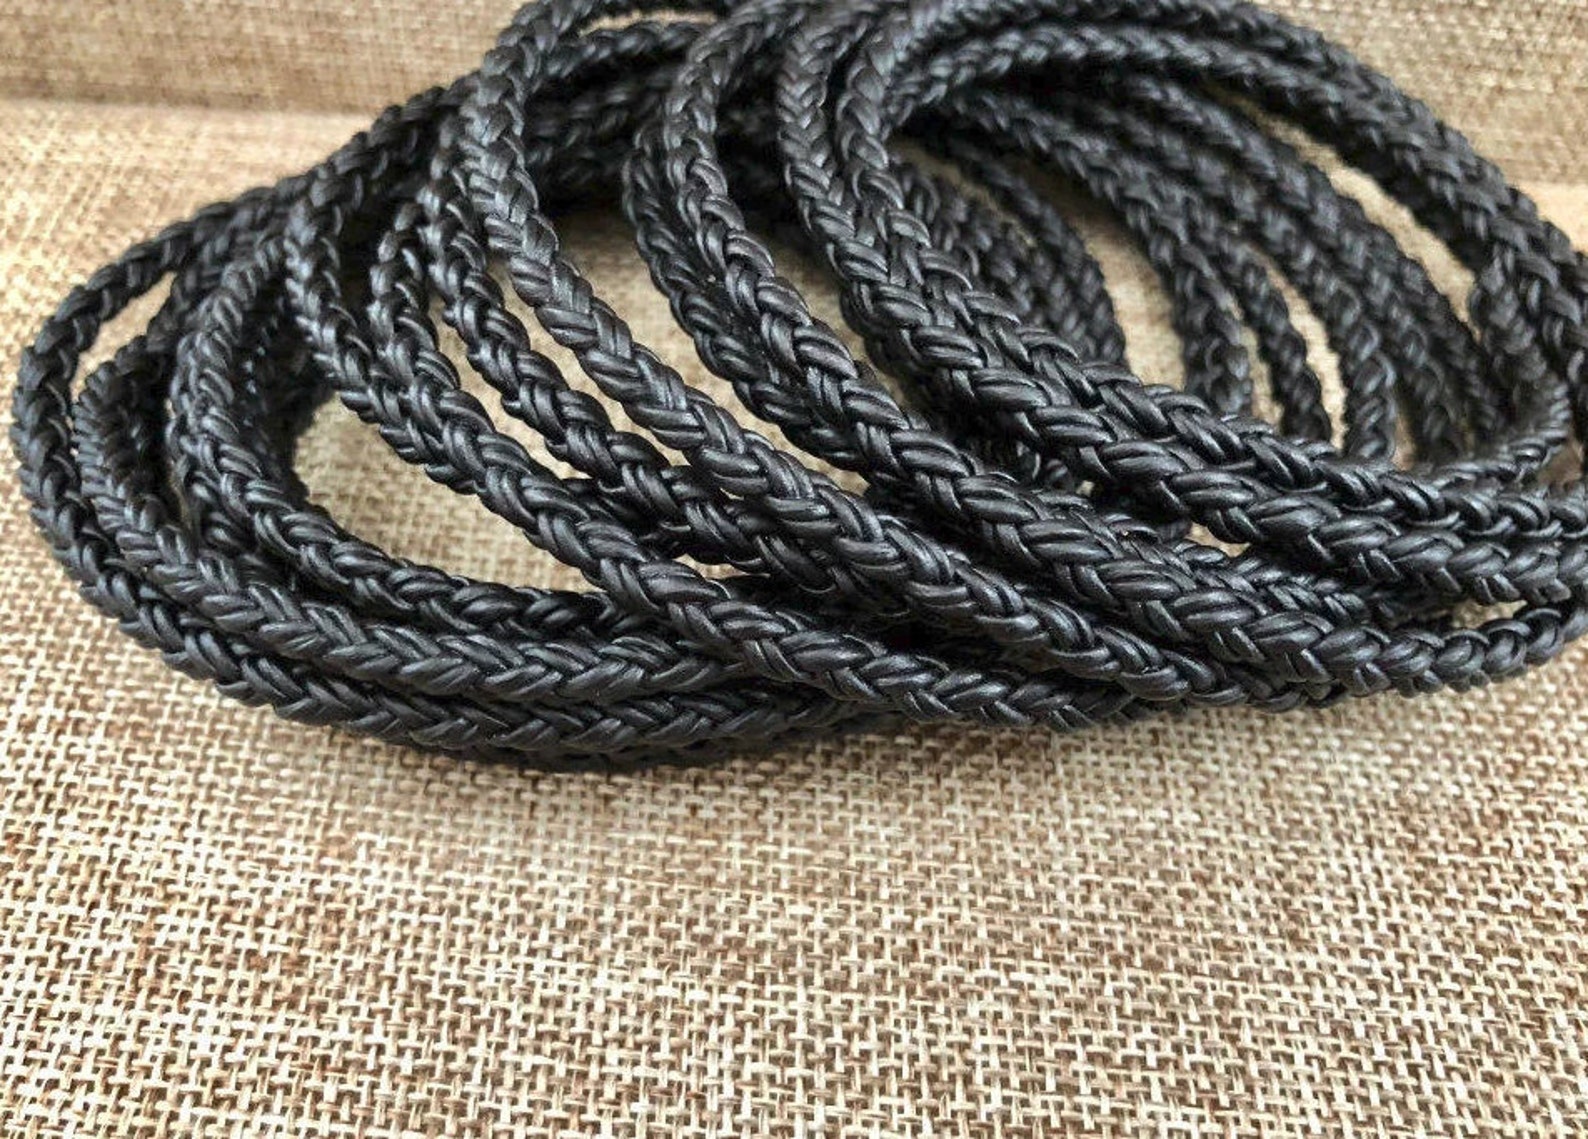 8mm Black Round Braided Leather Cord Natural Dye 7.7mm - Etsy